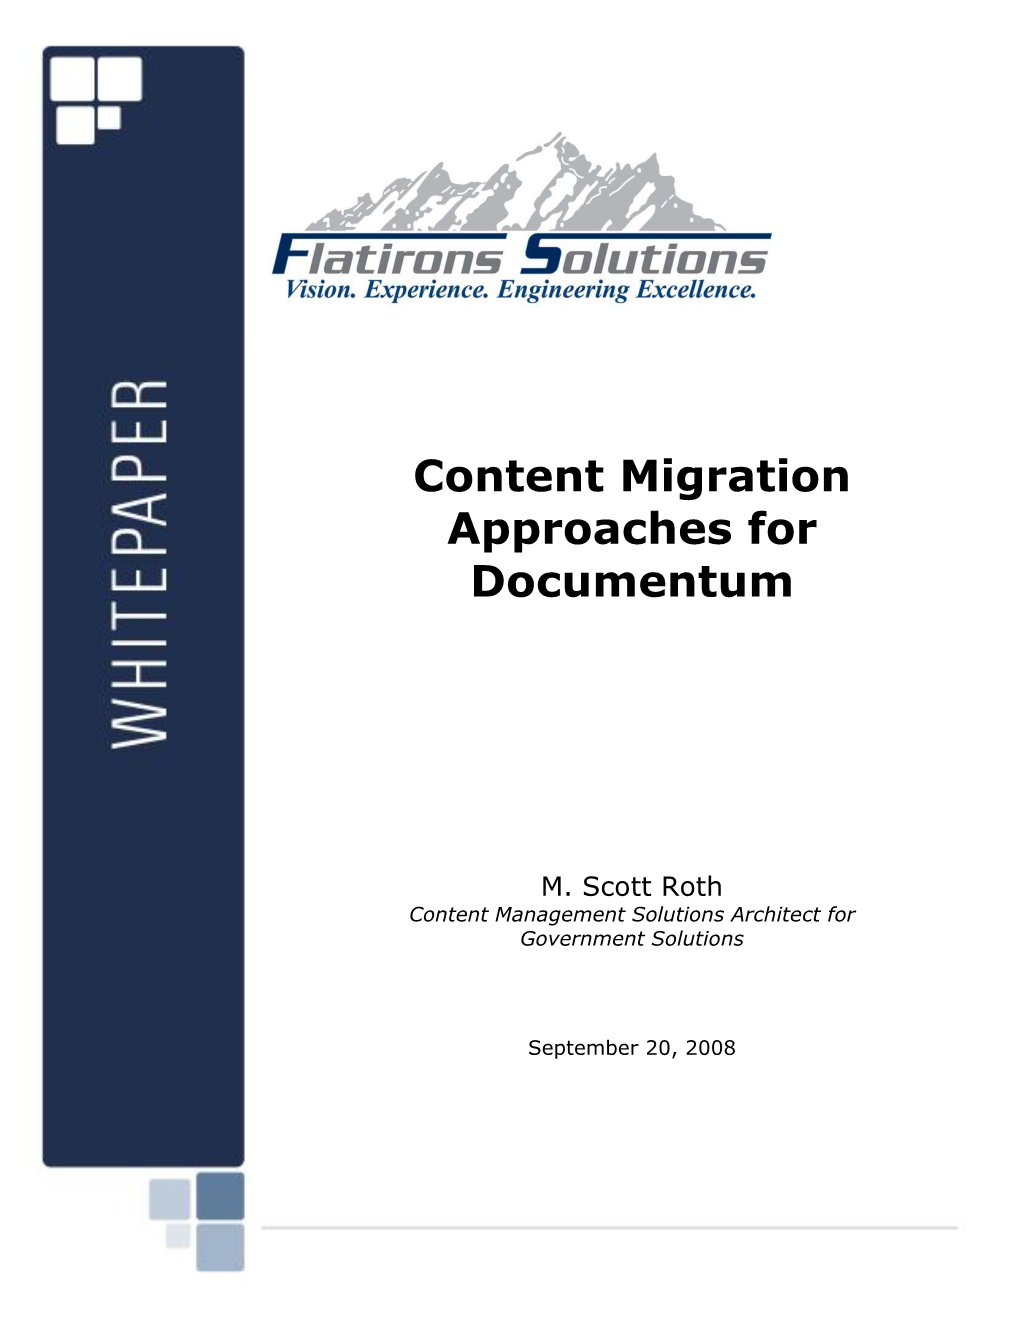 Content Migration Approaches-V2